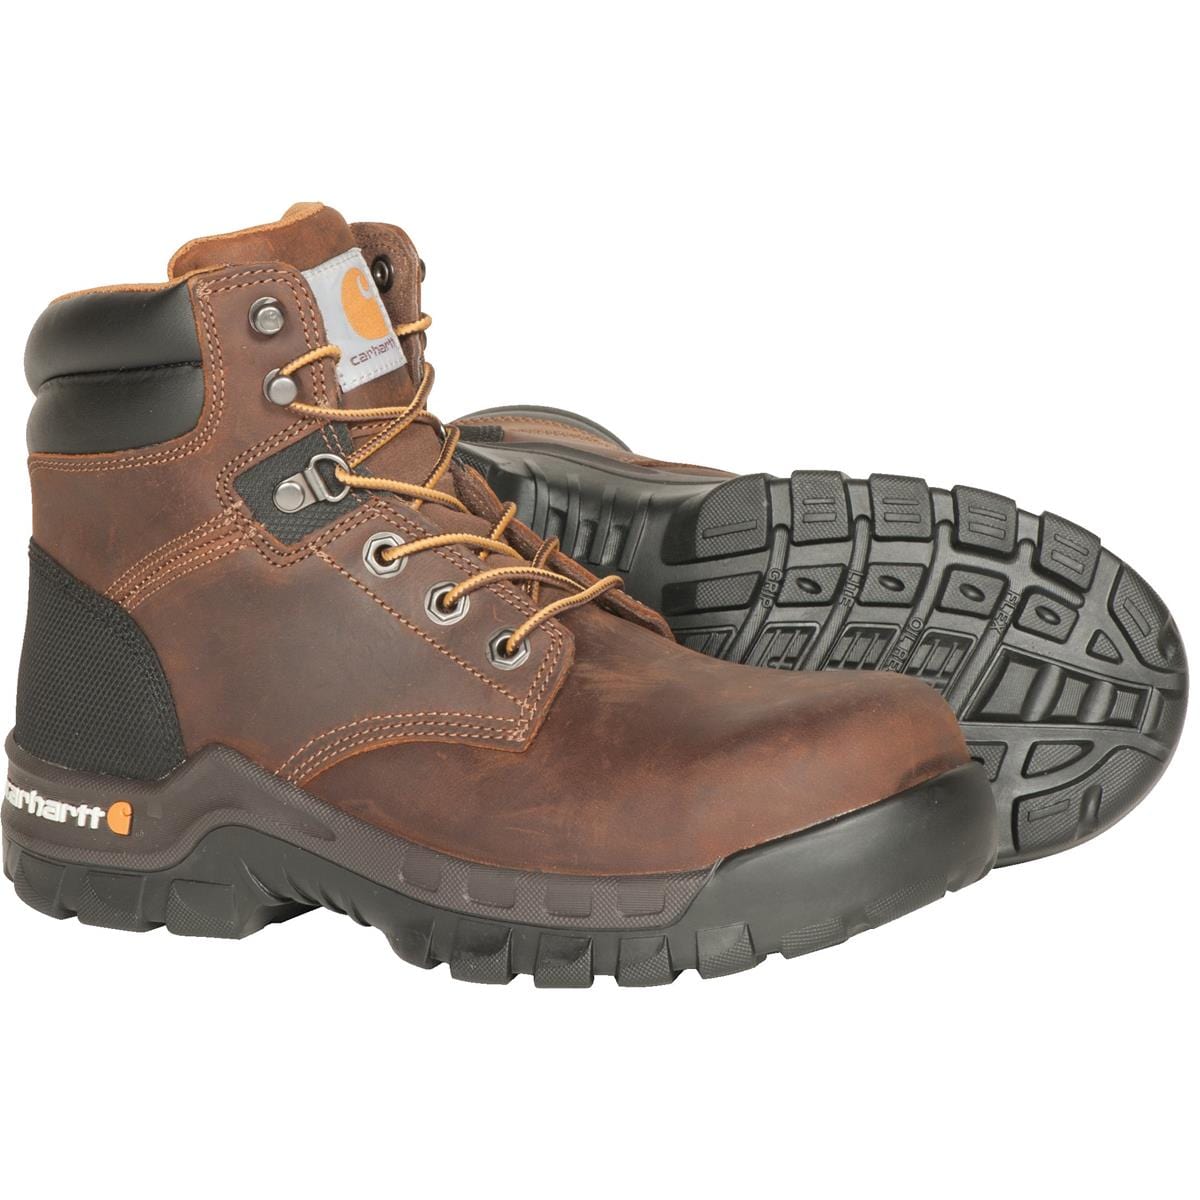 cmf6366 boots